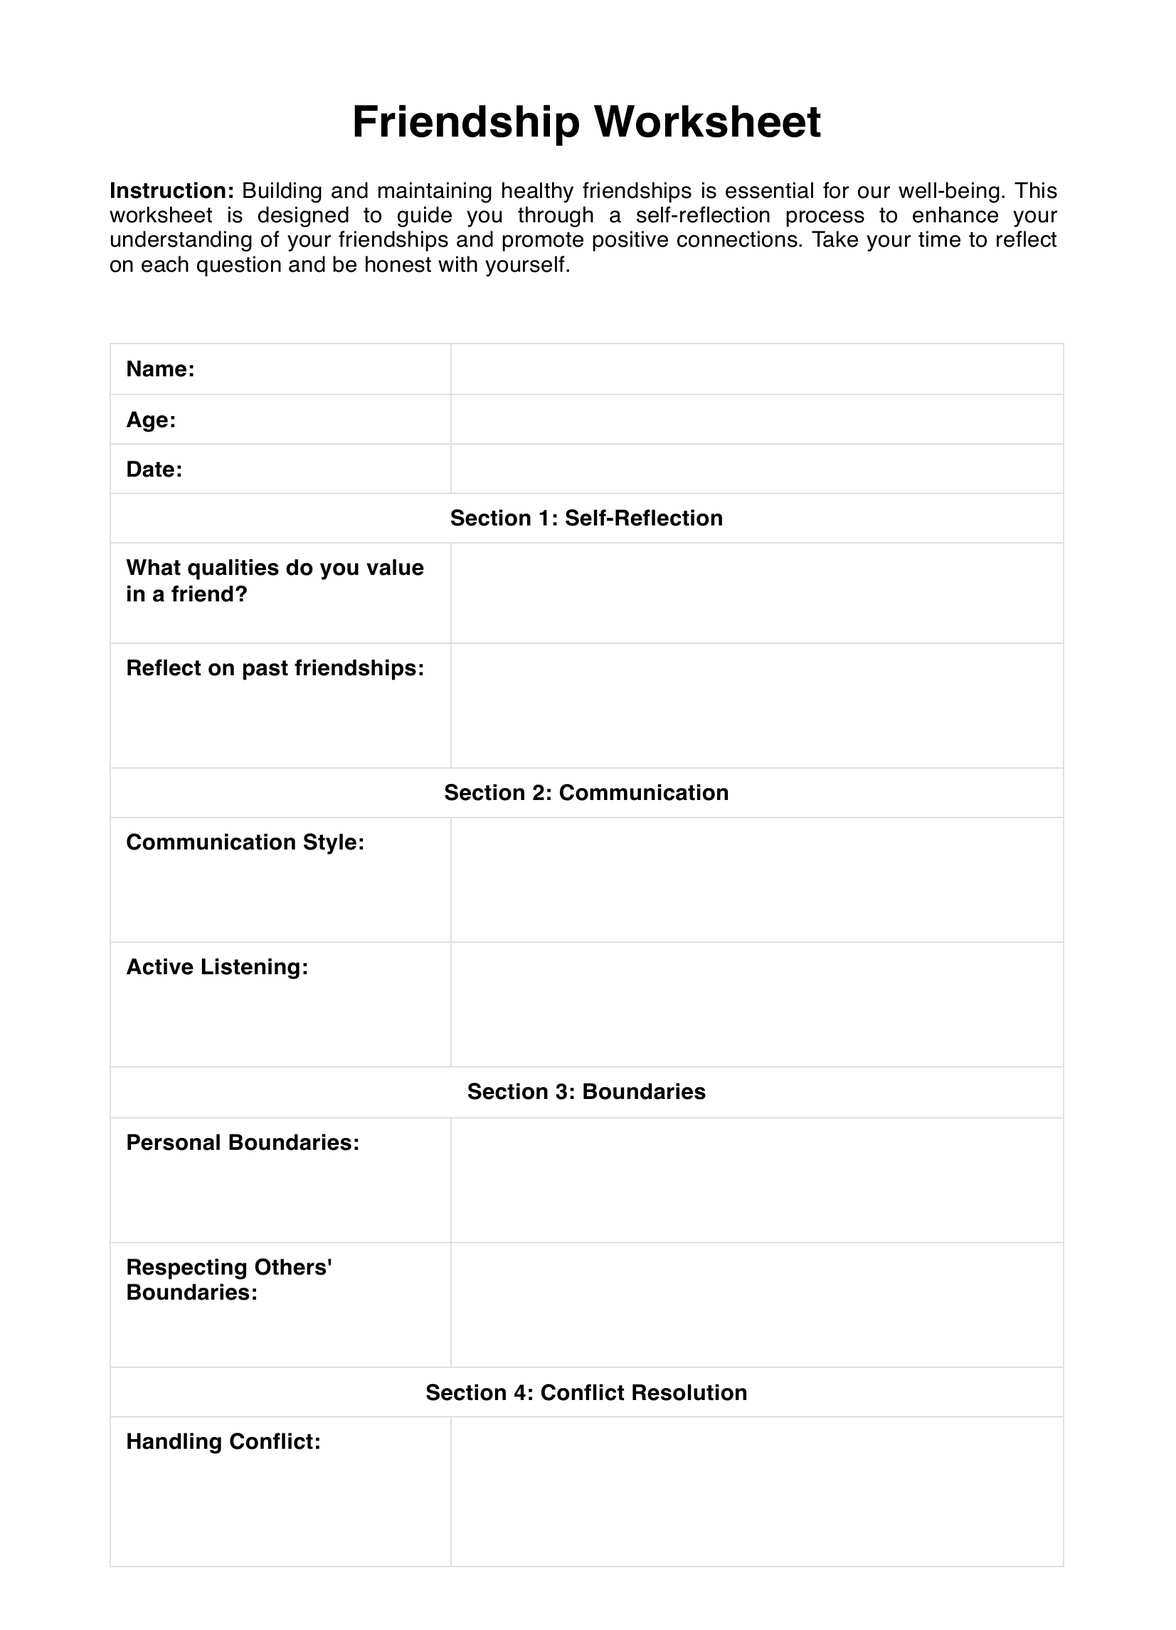 Friendship Worksheets PDF Example